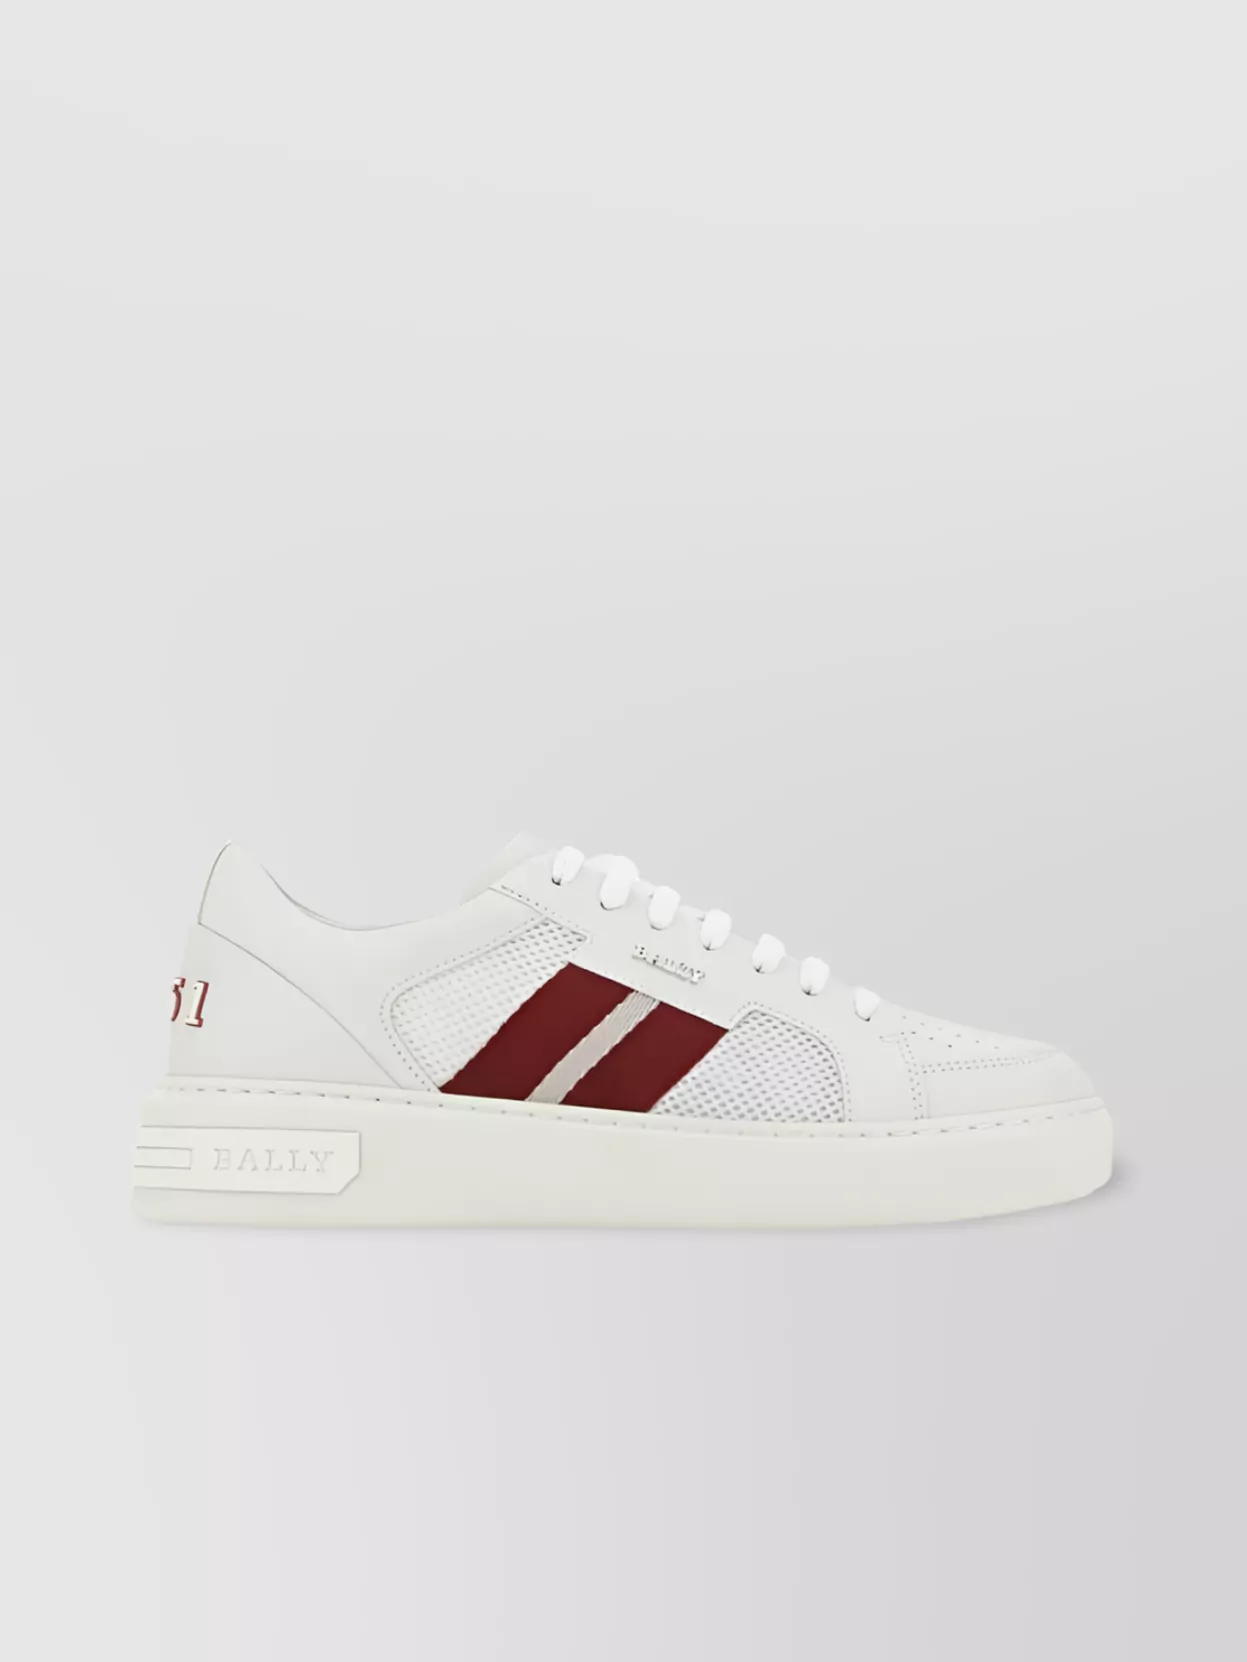 Shop Bally Modern Sneakers With Striking Design In Burgundy